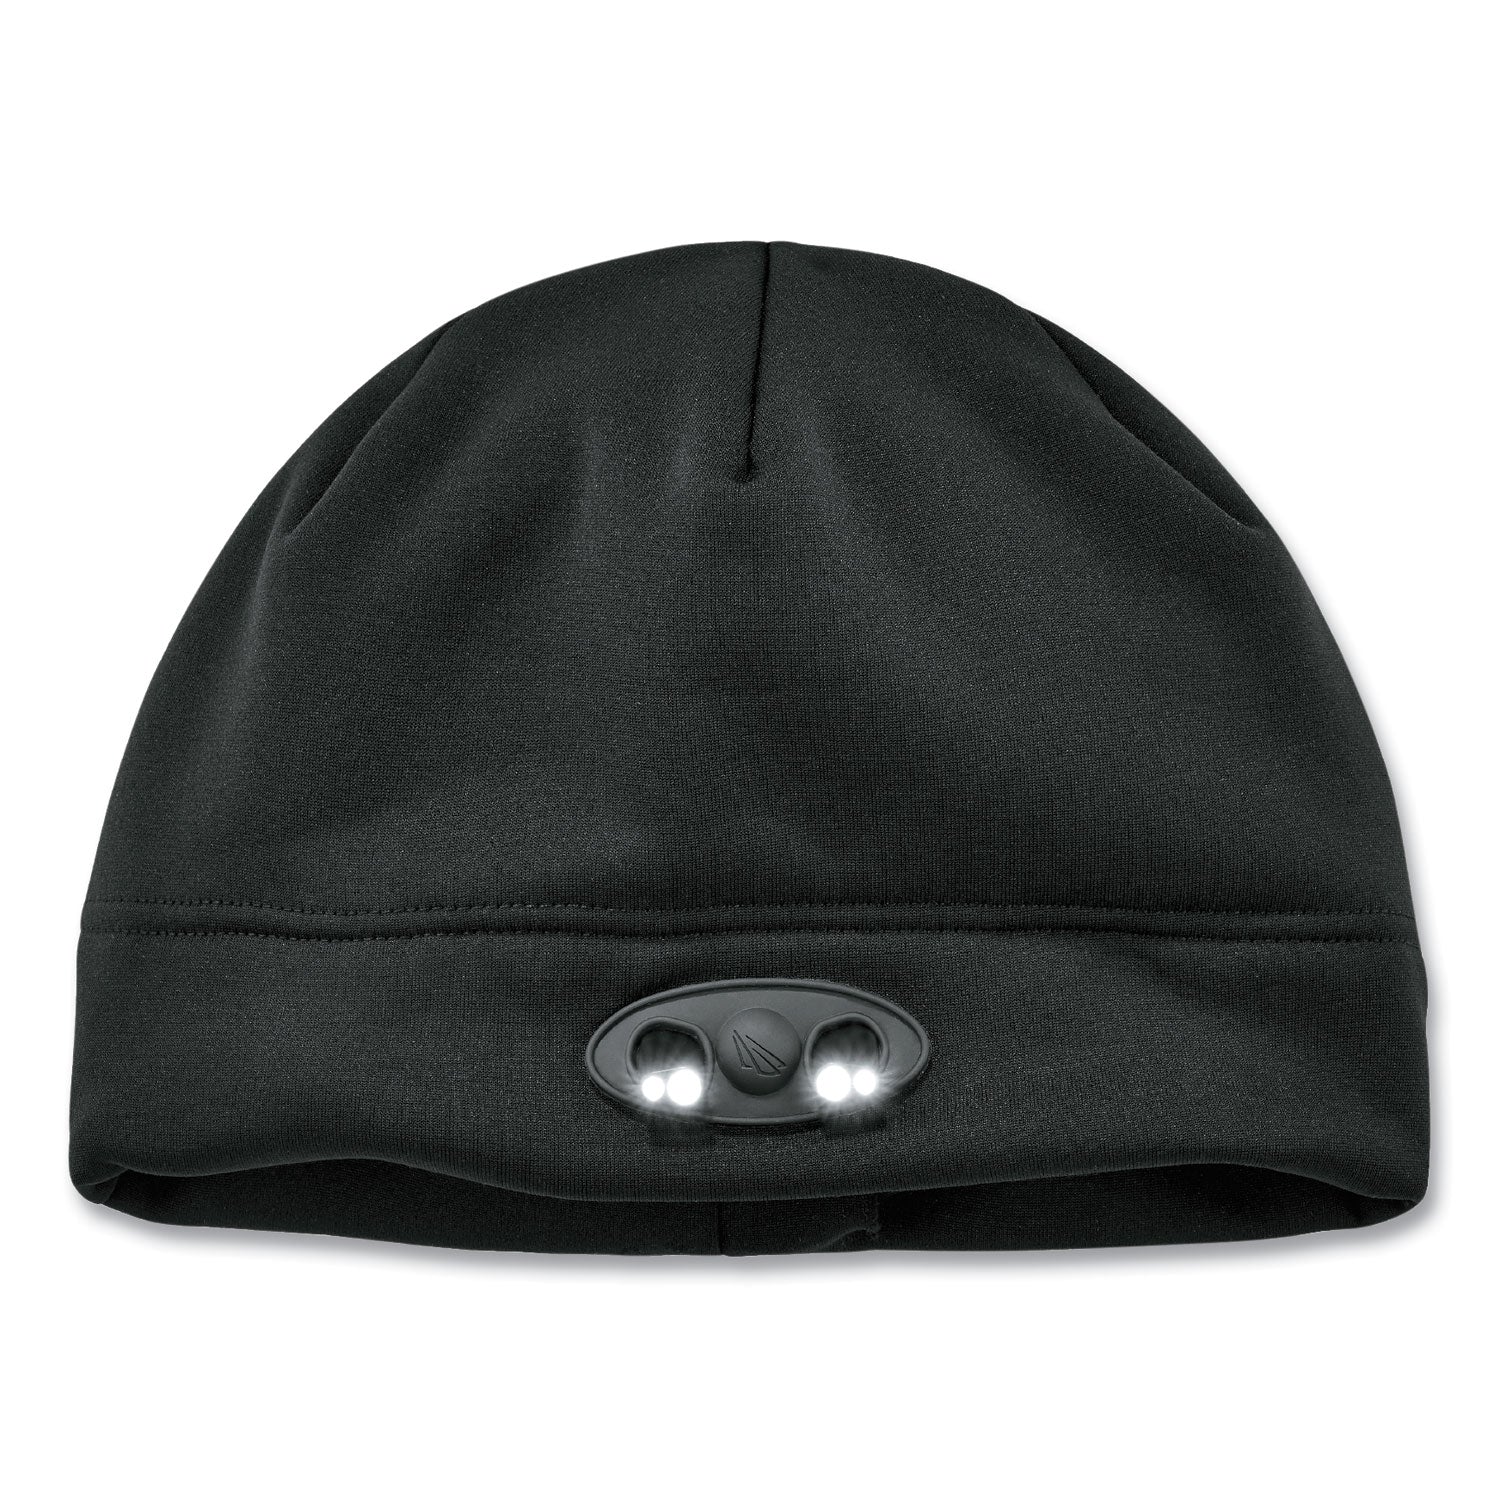 n-ferno-6804-skull-cap-winter-hat-with-led-lights-one-size-fits-mosts-black-ships-in-1-3-business-days_ego16803 - 1